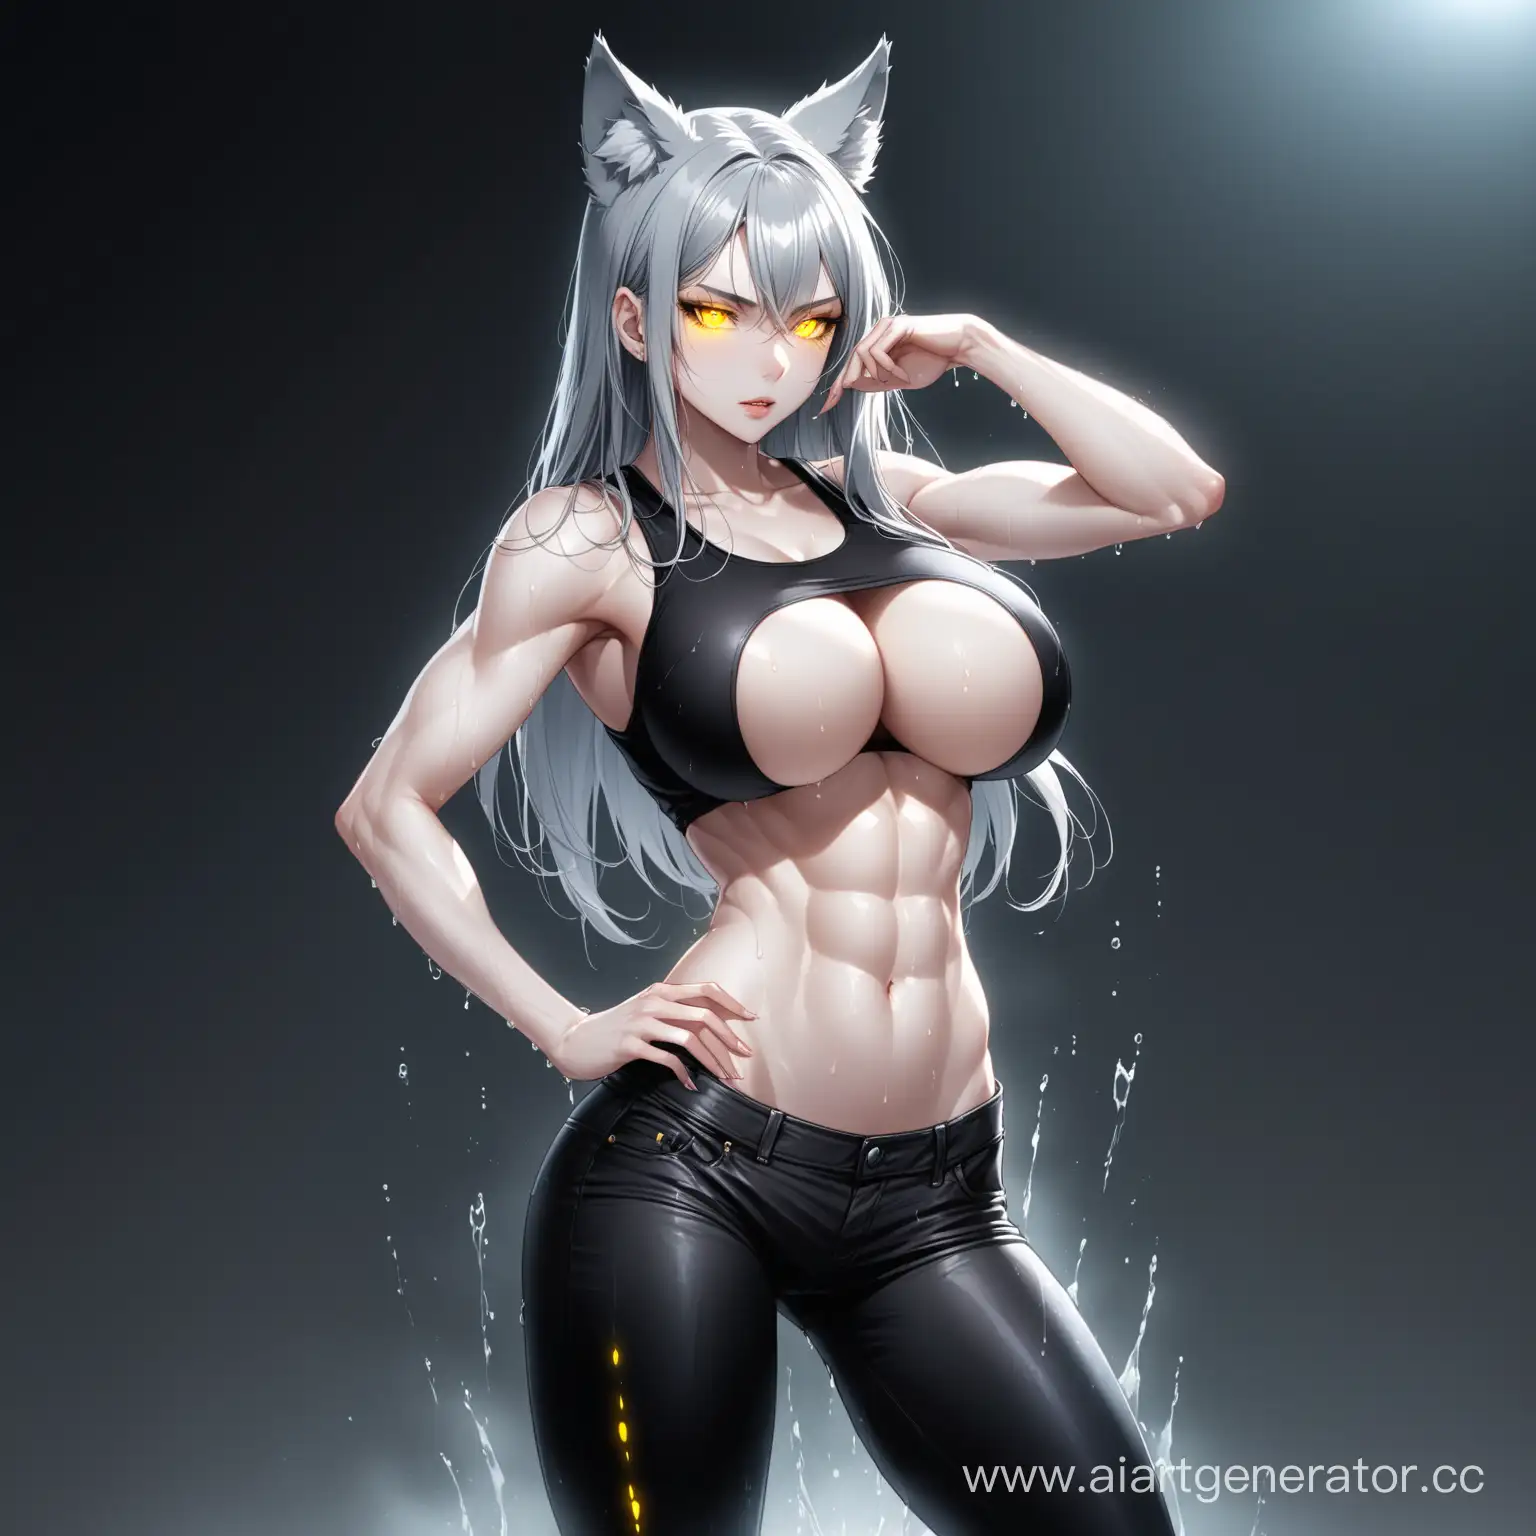 Seductive-Wolf-Girl-with-Glowing-Yellow-Eyes-and-Leather-Jacket